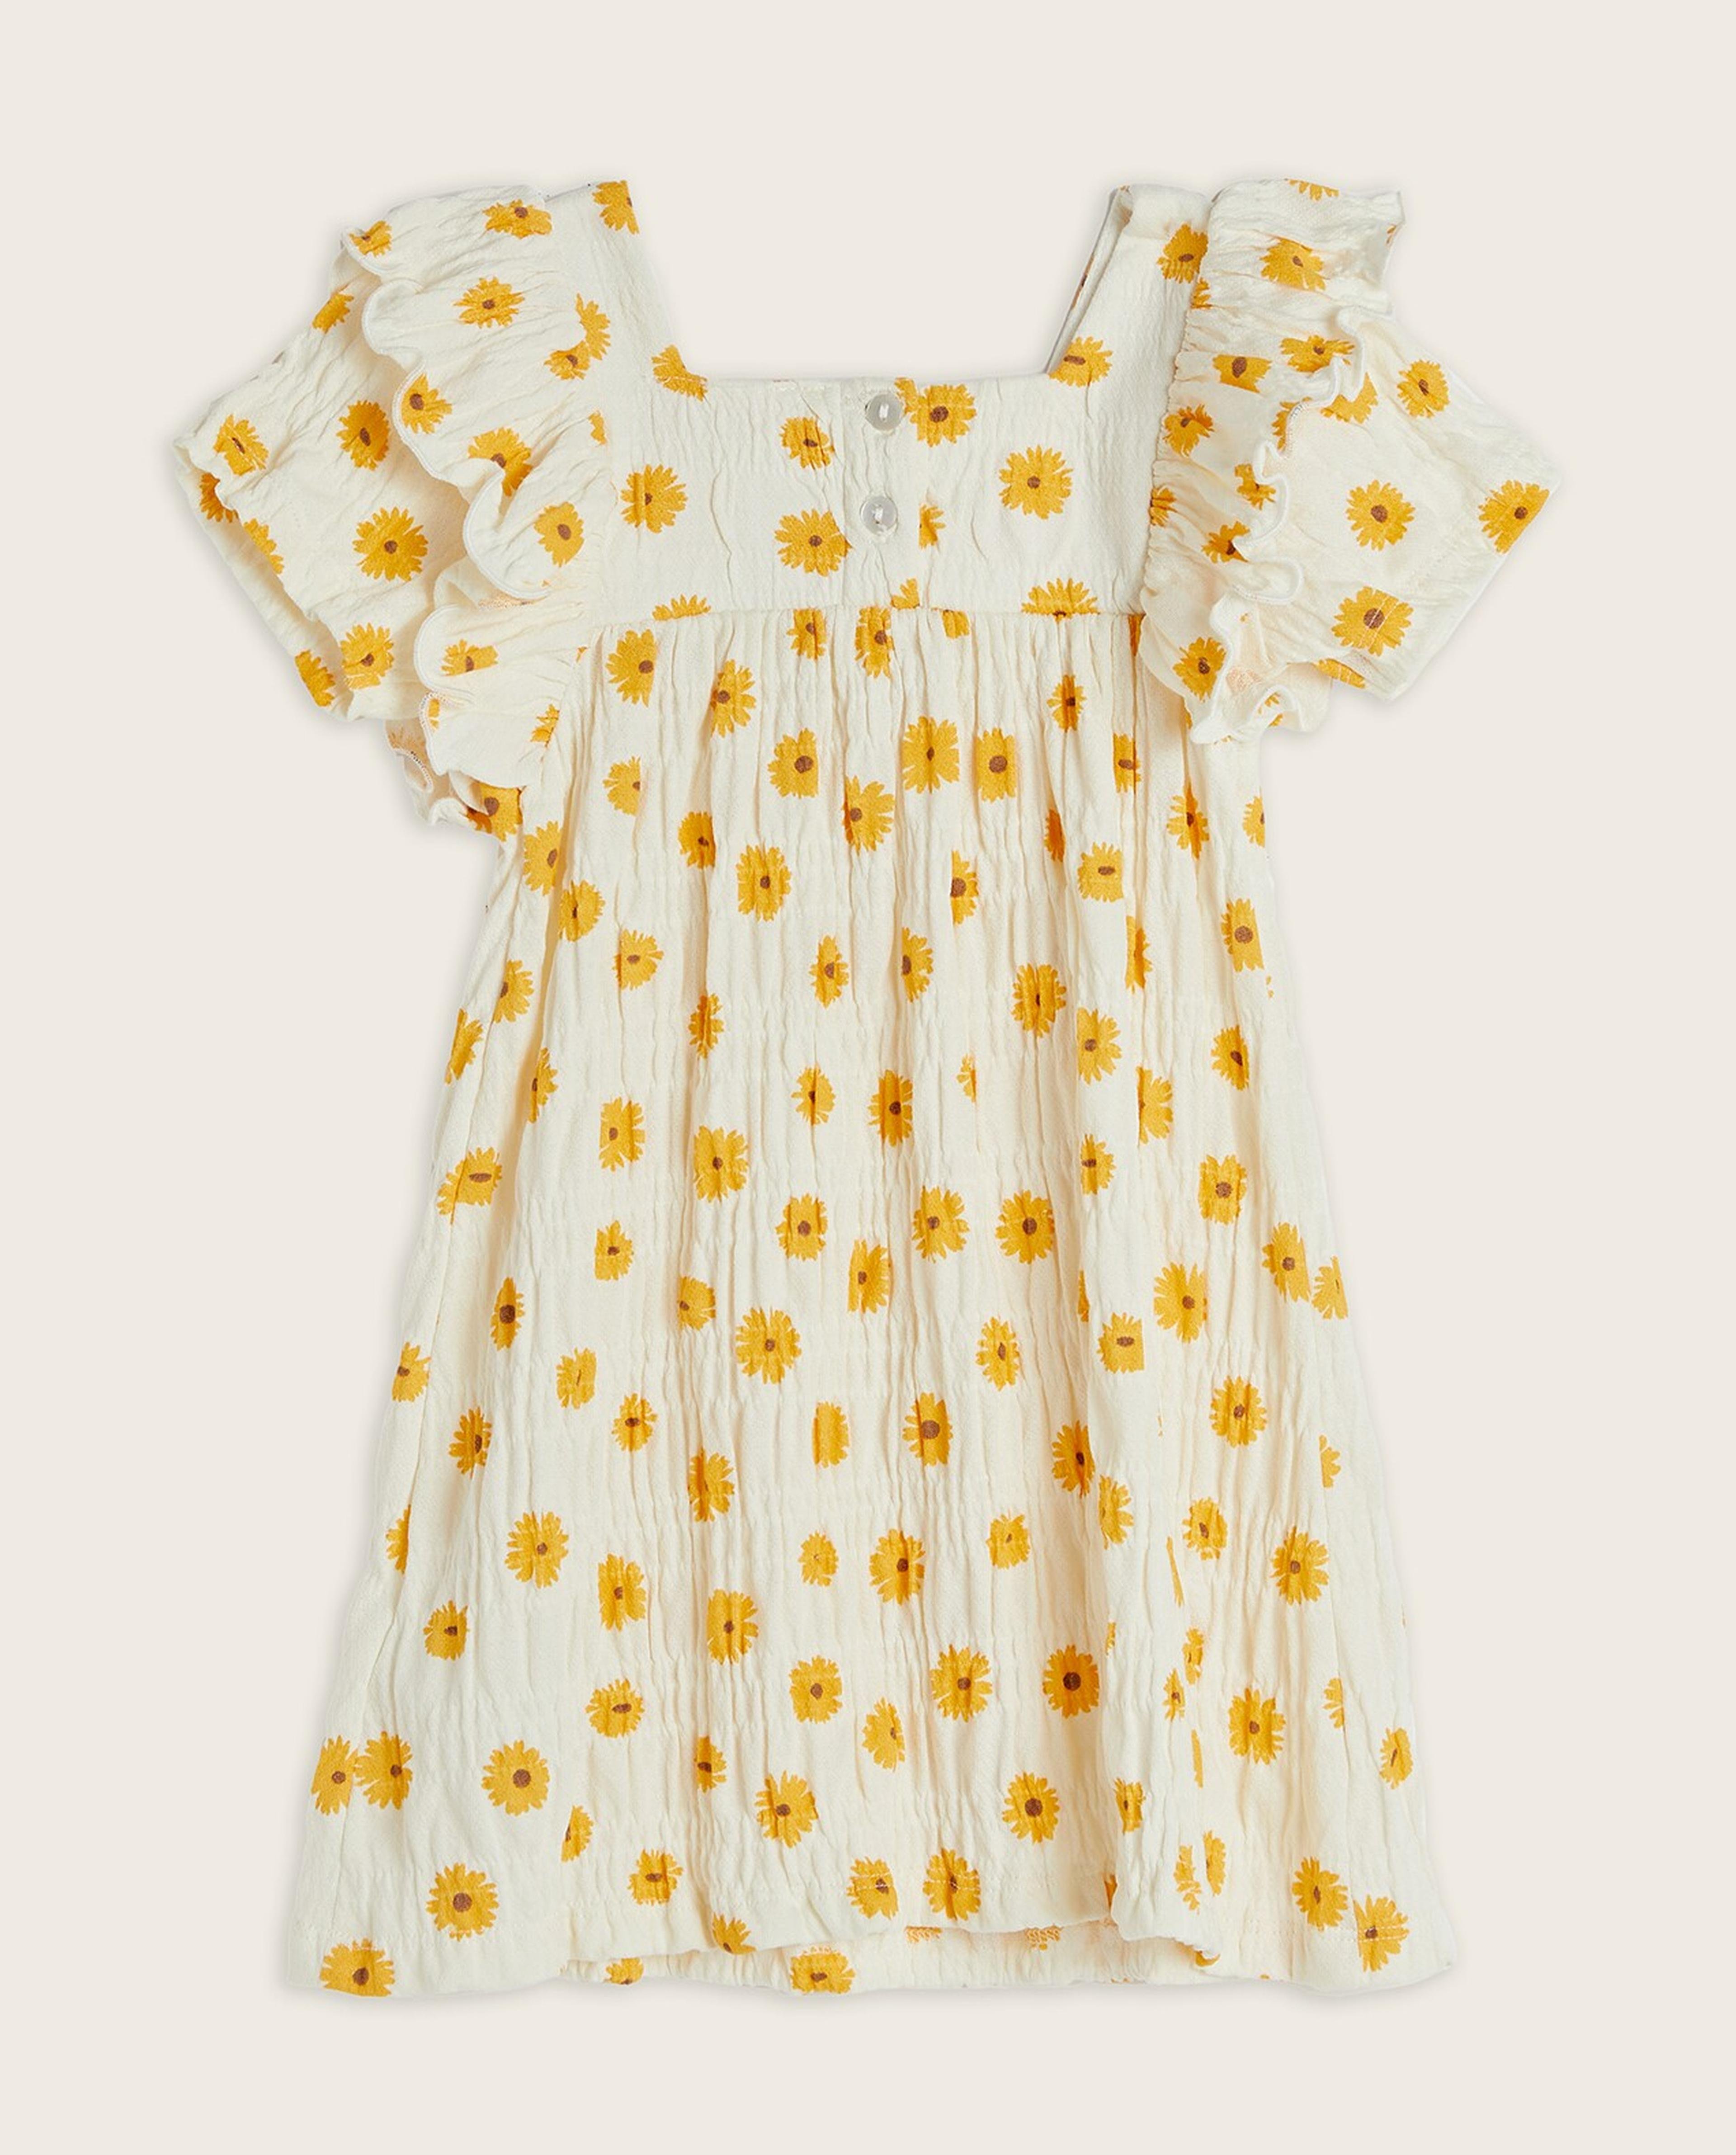 Printed A-Line Dress with Square Neck and Short Sleeves